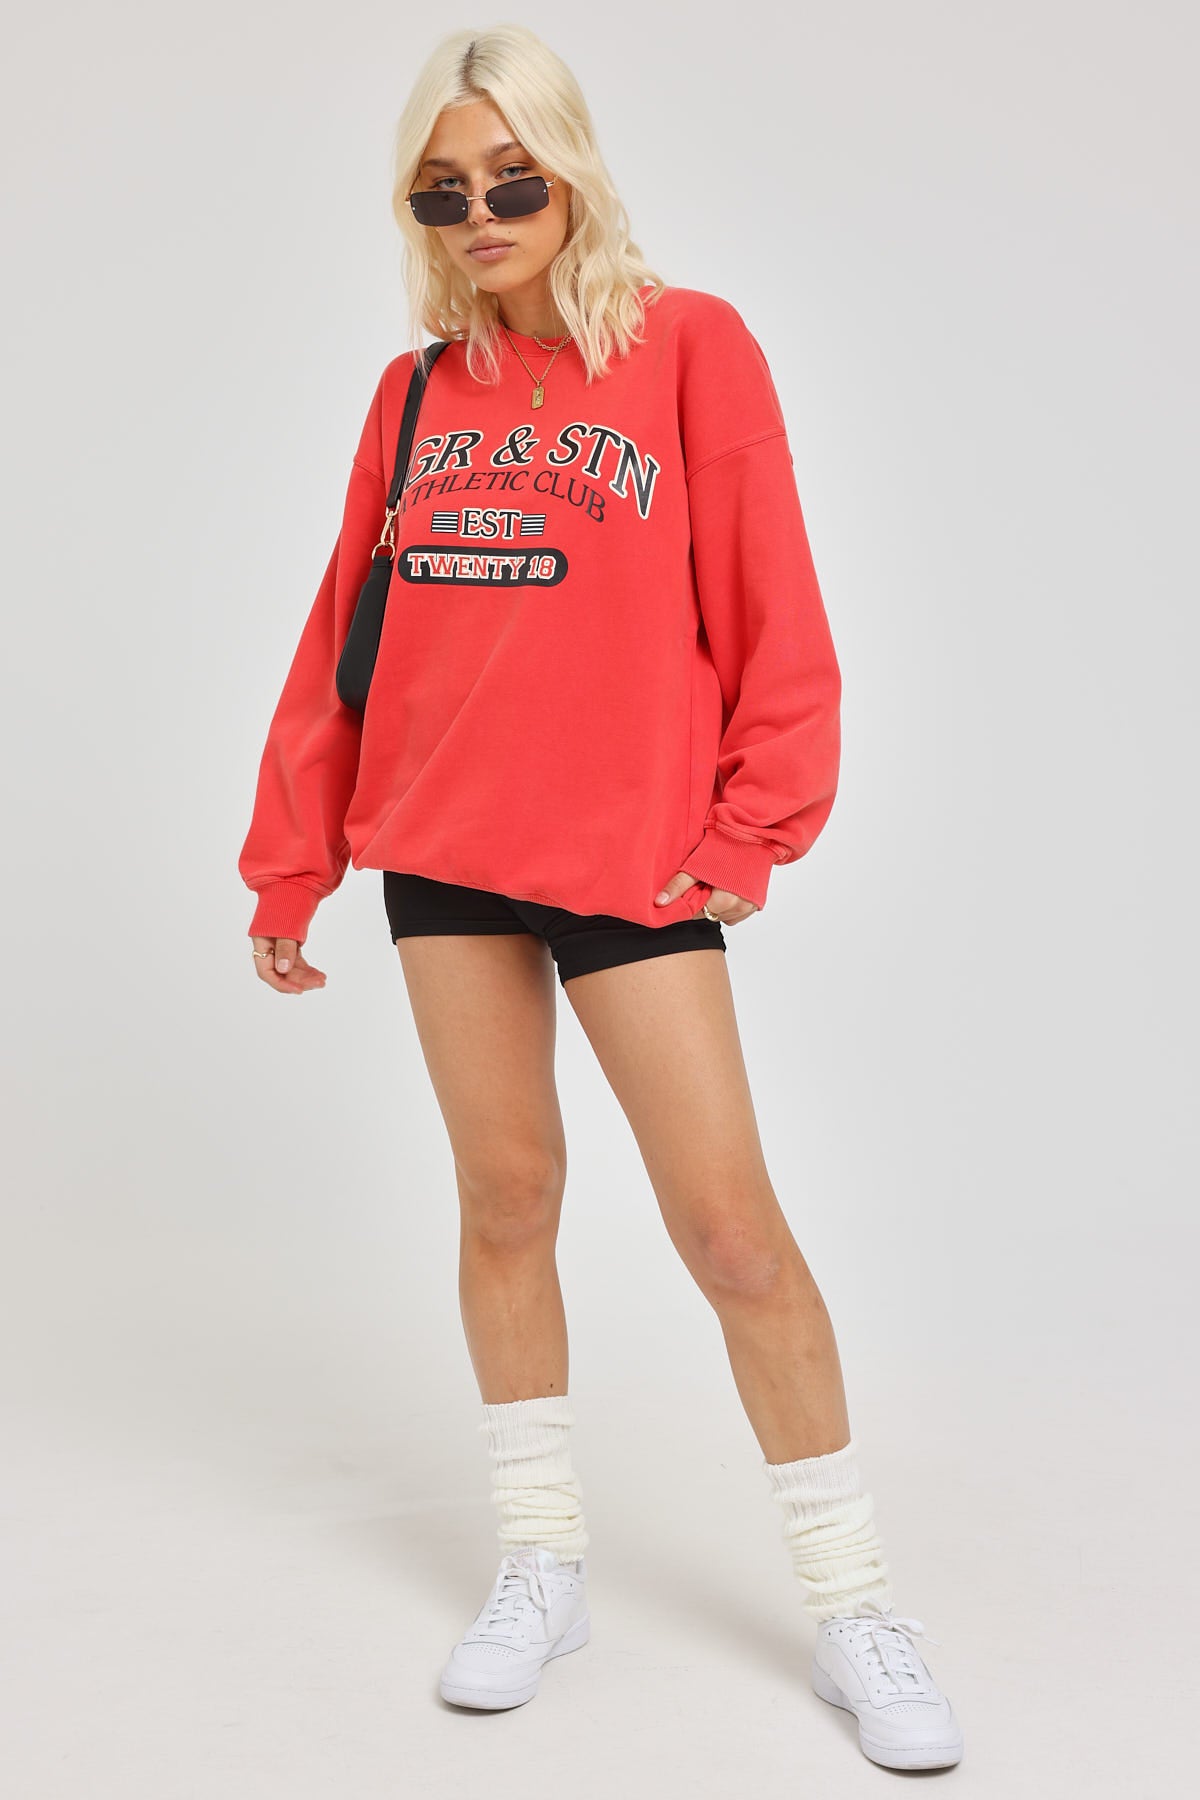 Jgr & Stn Clubhouse Oversized Sweat Washed Red